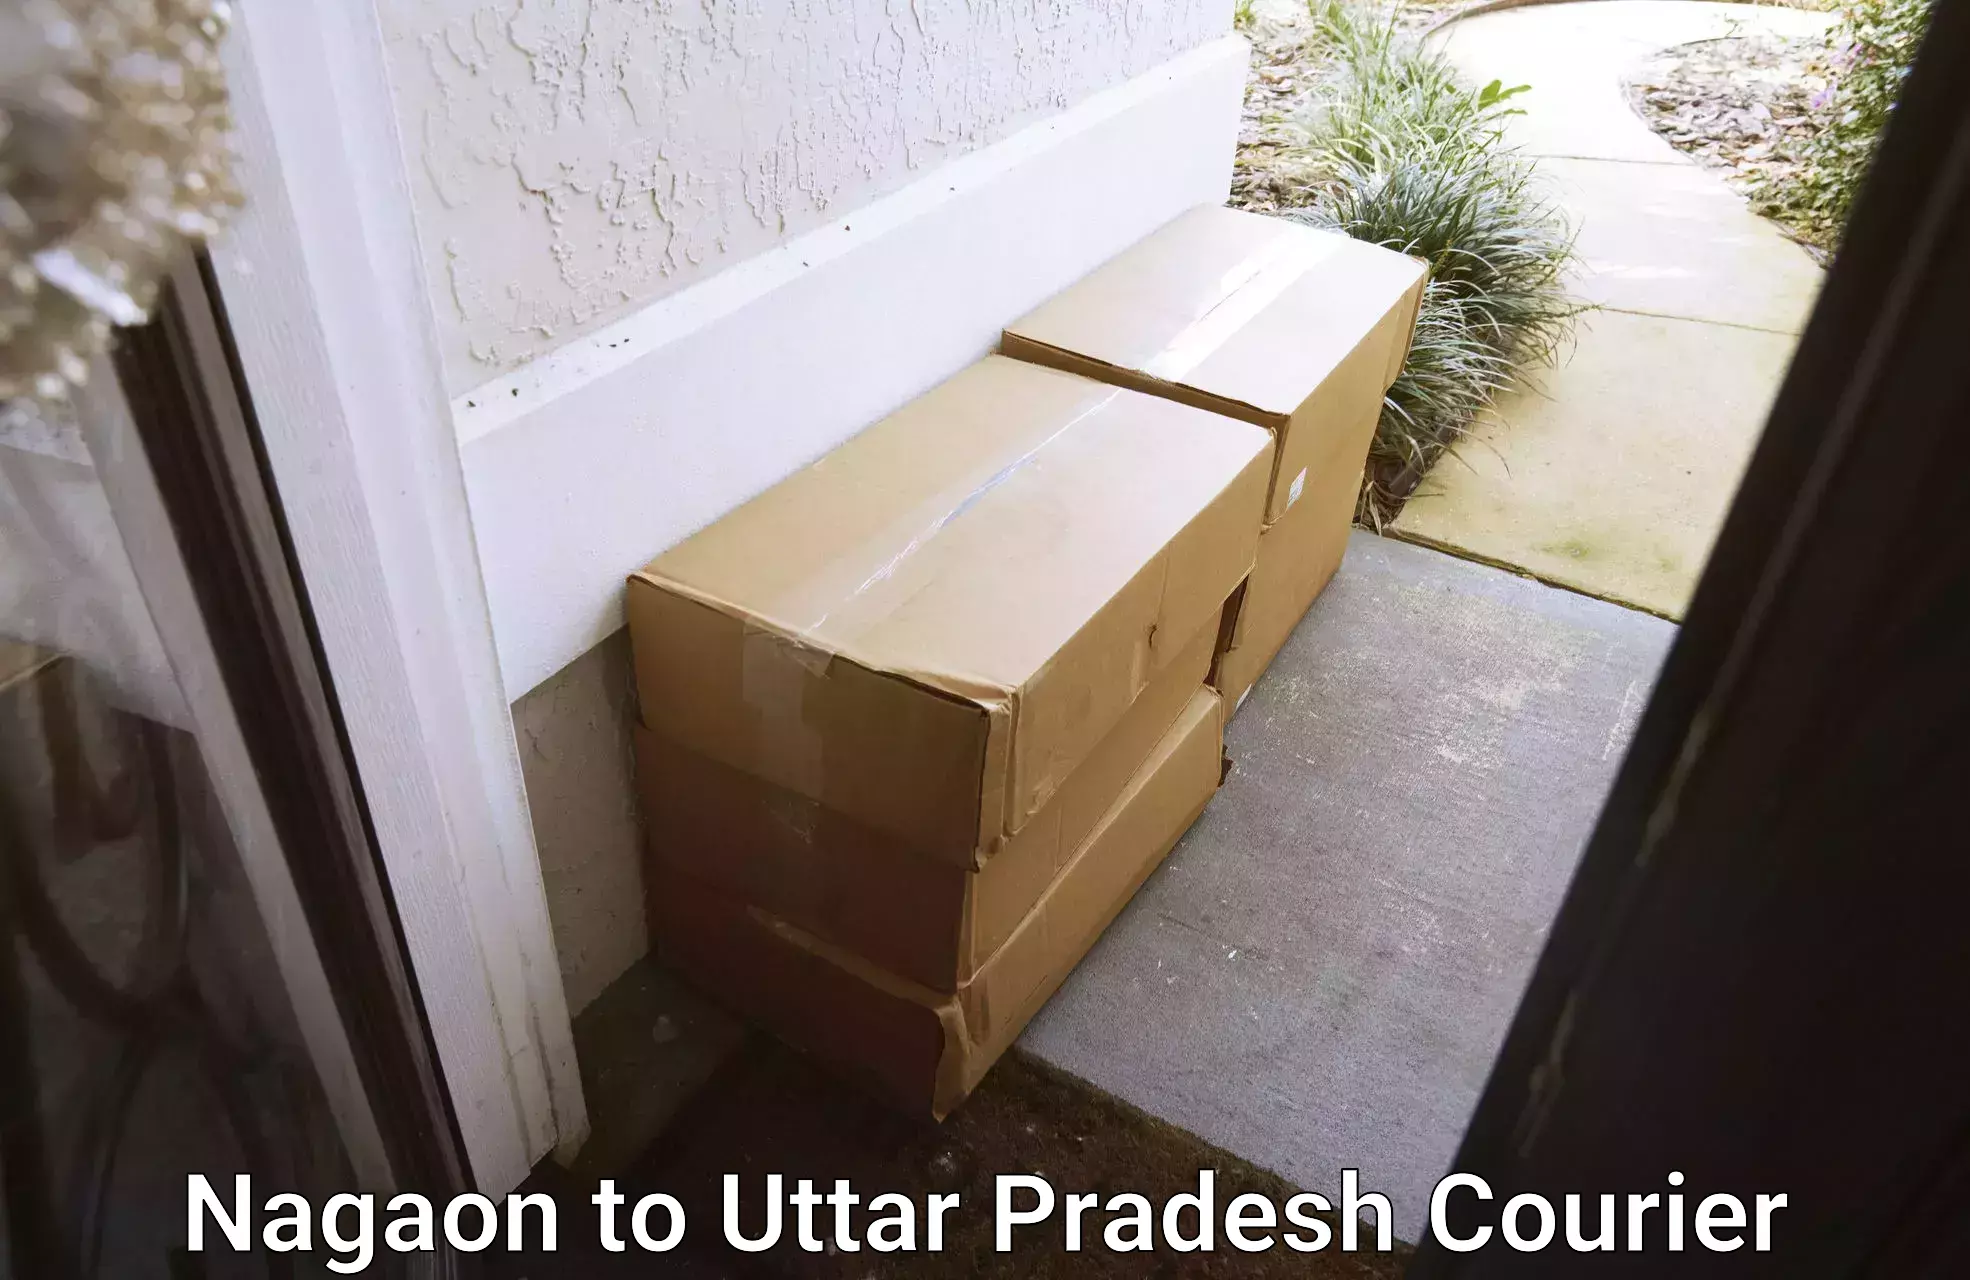 Professional courier services Nagaon to Kasganj